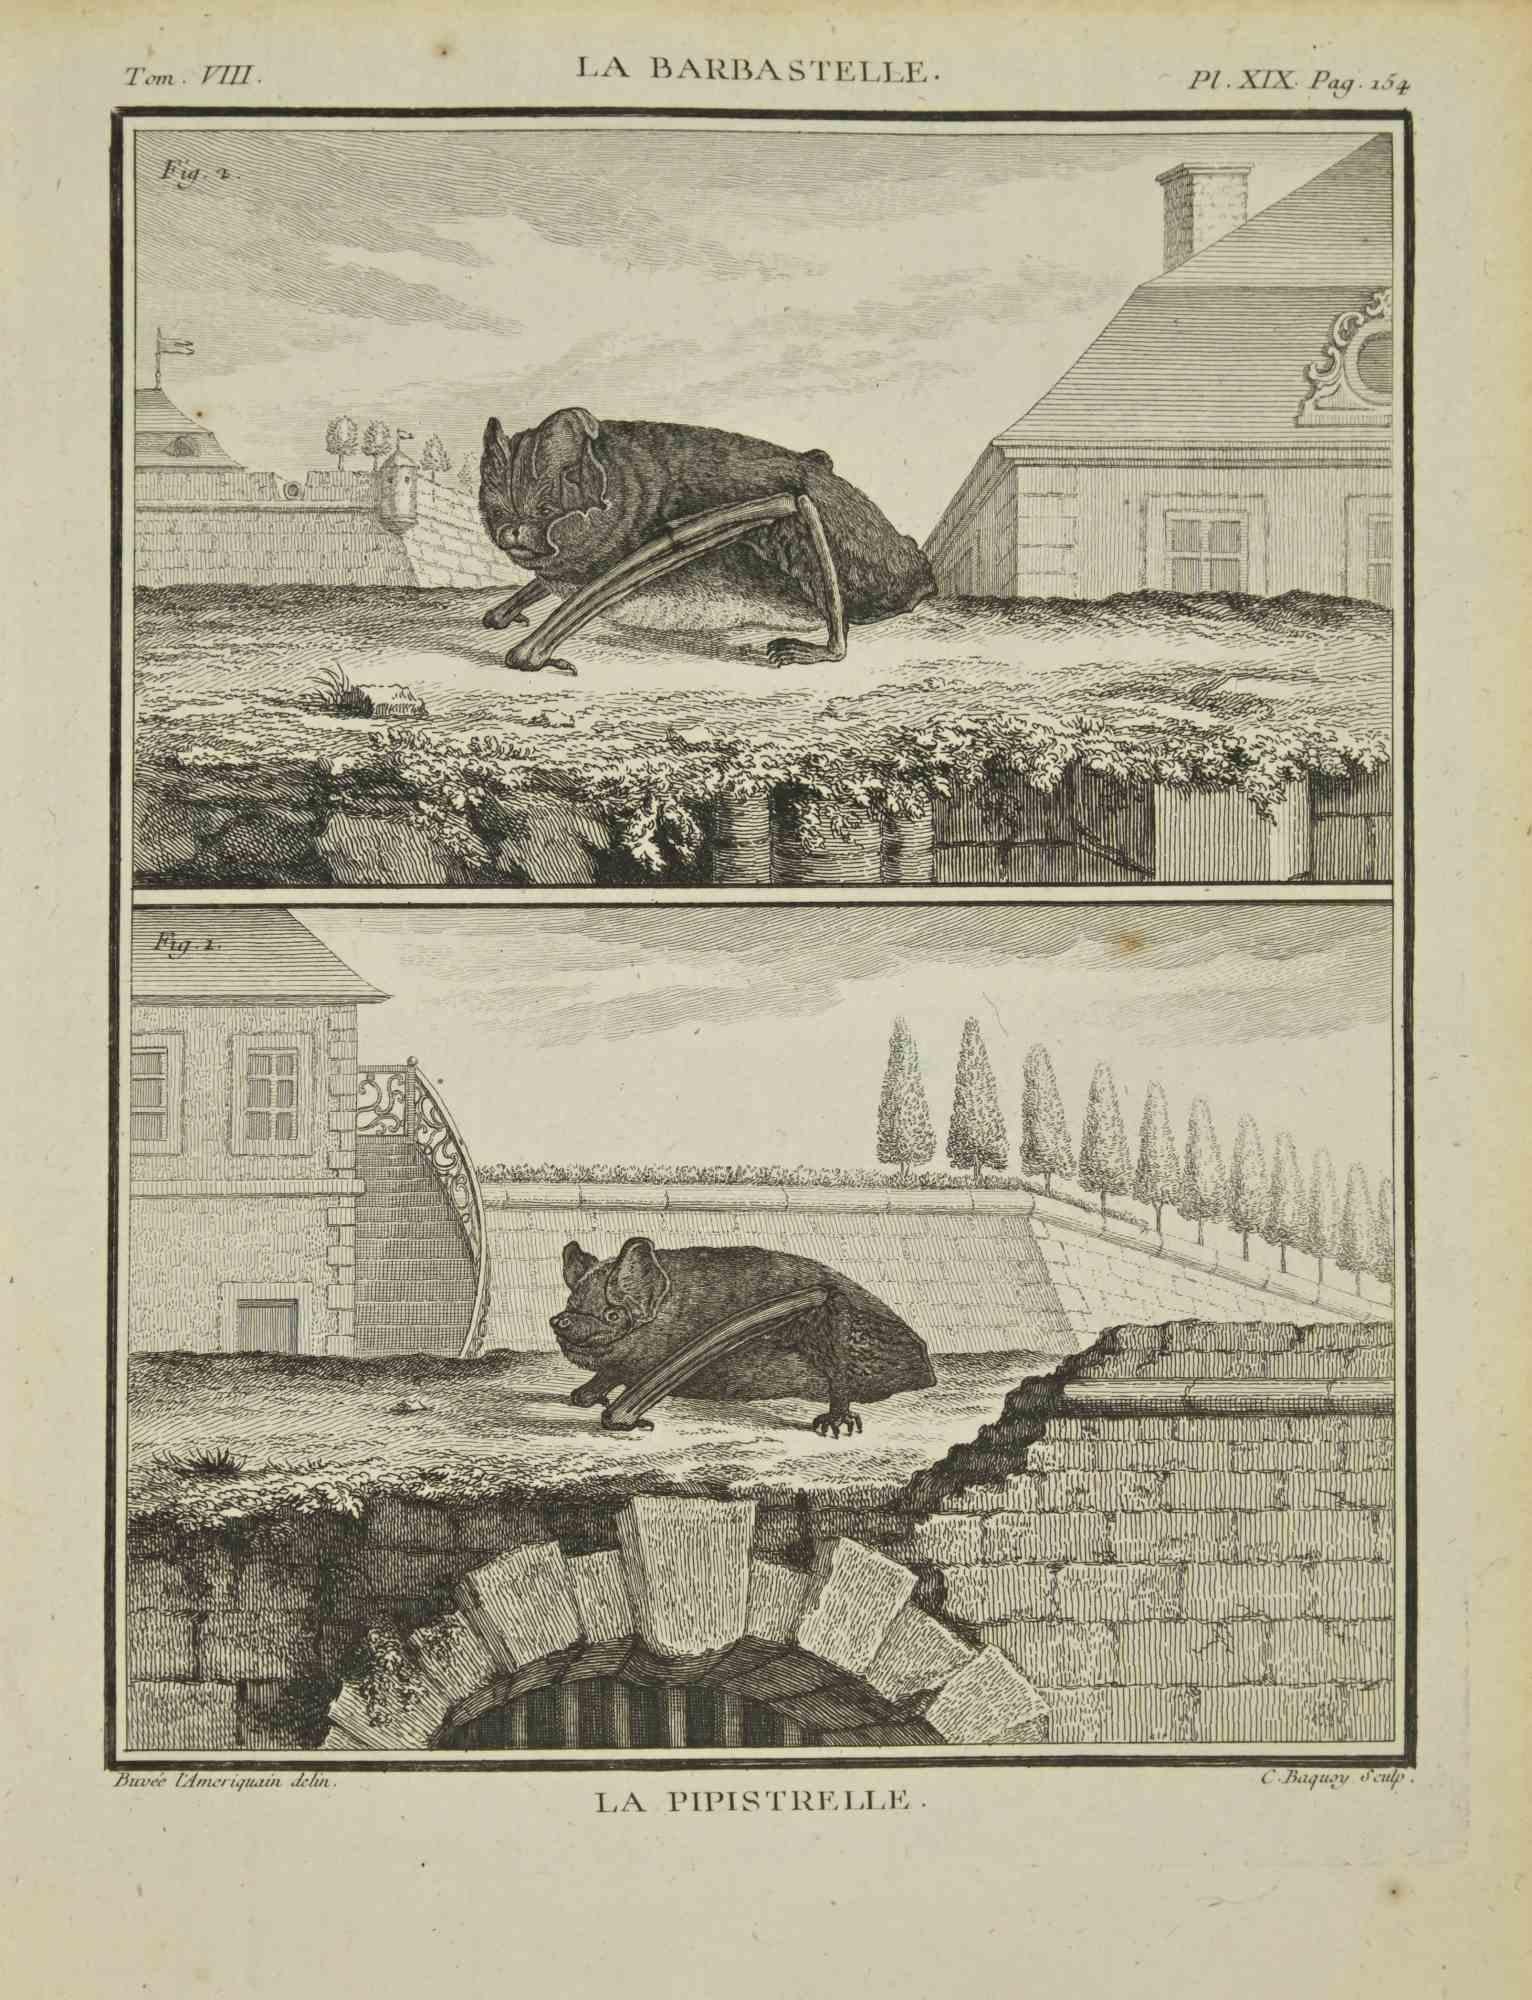 La Pipistrelle is an etching realized by Jean Charles Baquoy in 1771.

It belongs to the suite "Histoire Naturelle de Buffon".

The Artist's signature is engraved lower right.

Good conditions with slight foxing.
